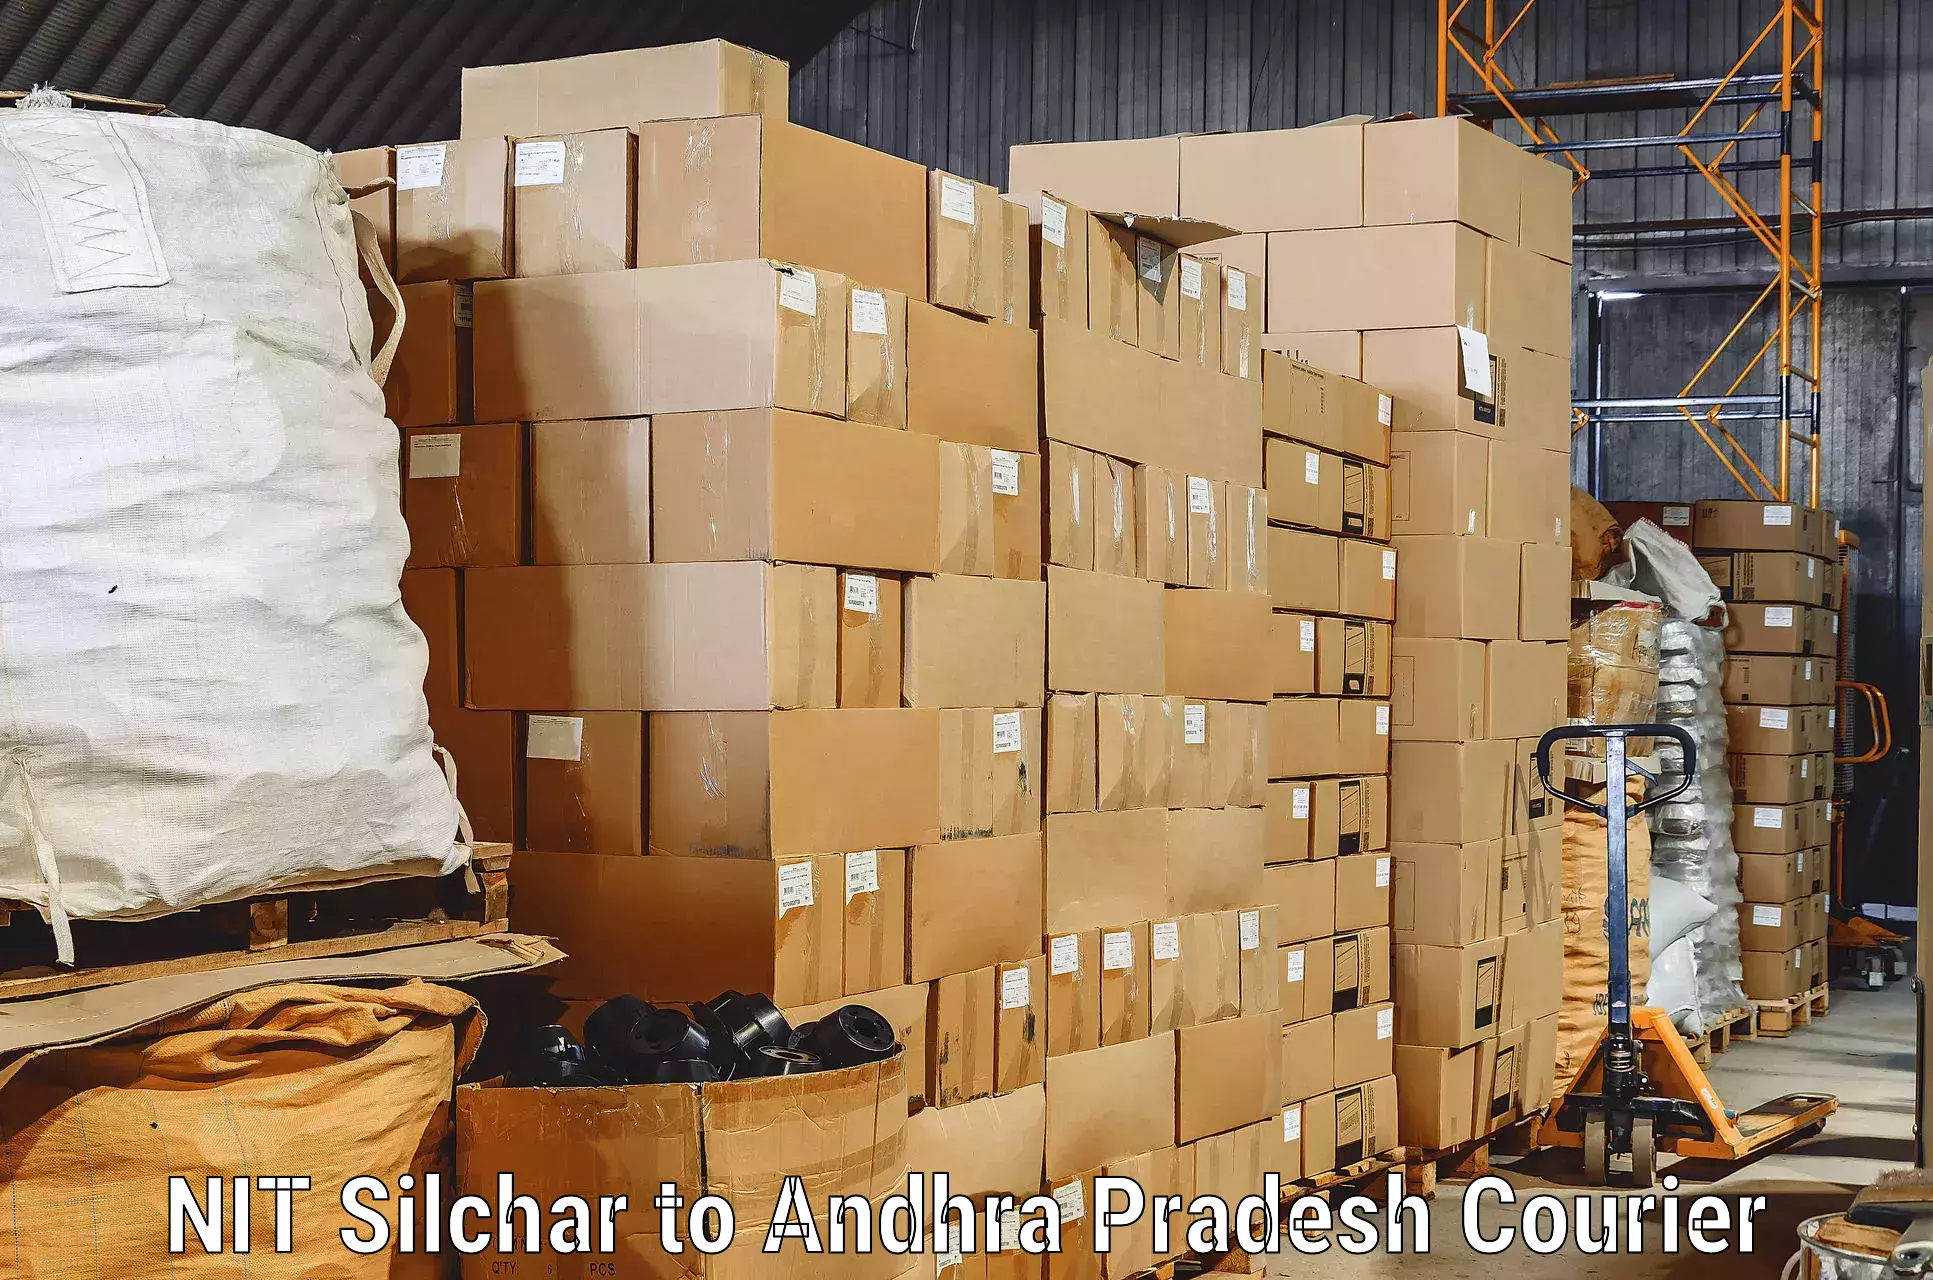 Expert goods movers NIT Silchar to Visakhapatnam Port